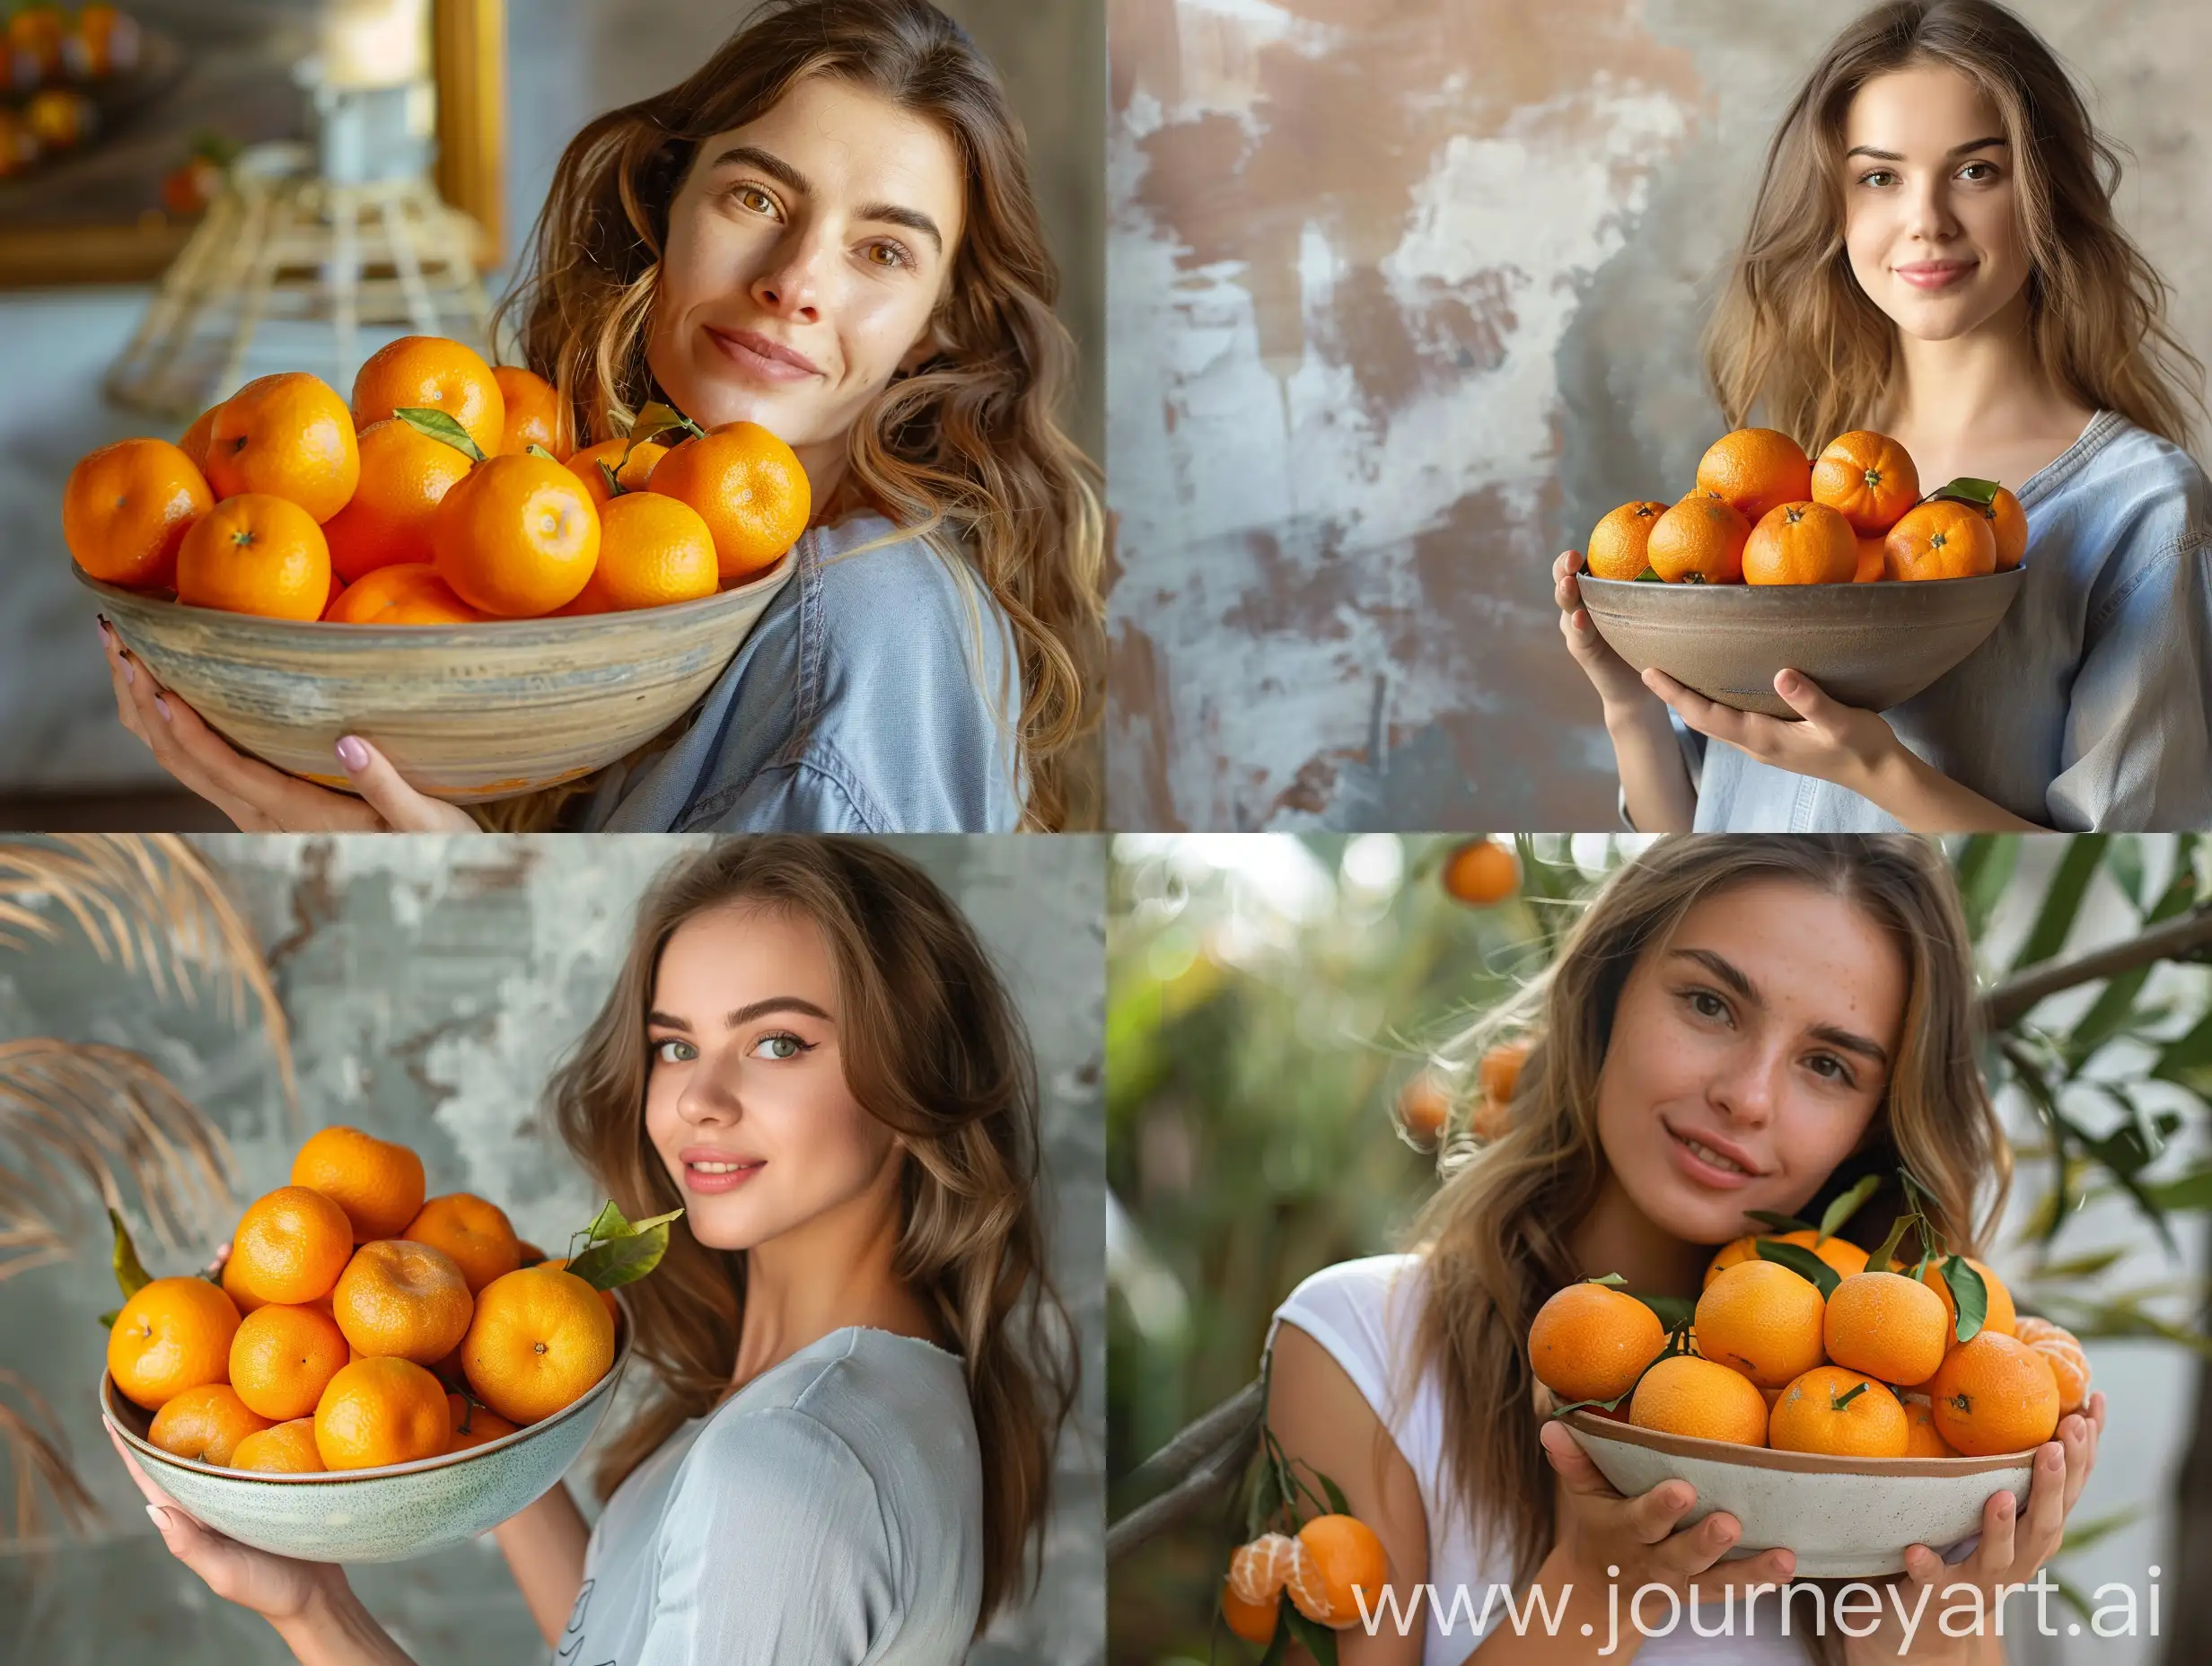 Woman-Holding-Bowl-of-Tangerines-in-Attractive-Advertising-Photo